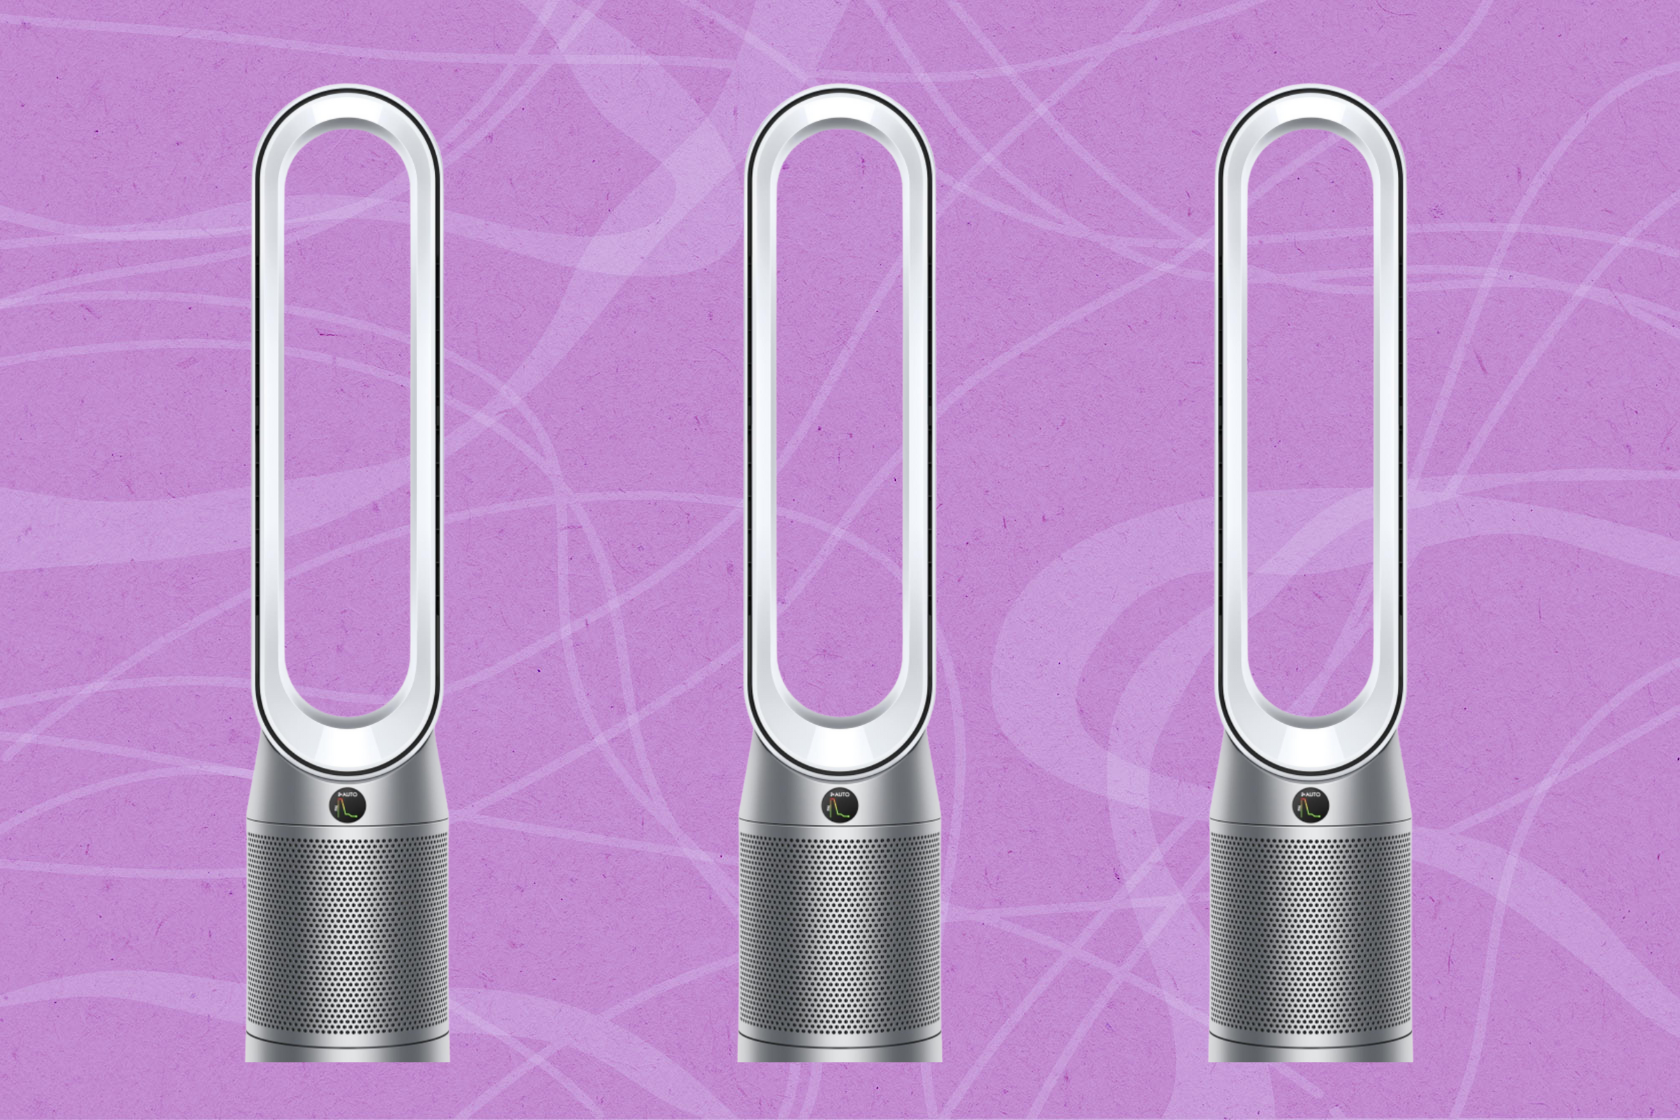 Save $130 on this Dyson air purifier that doubles as a fan